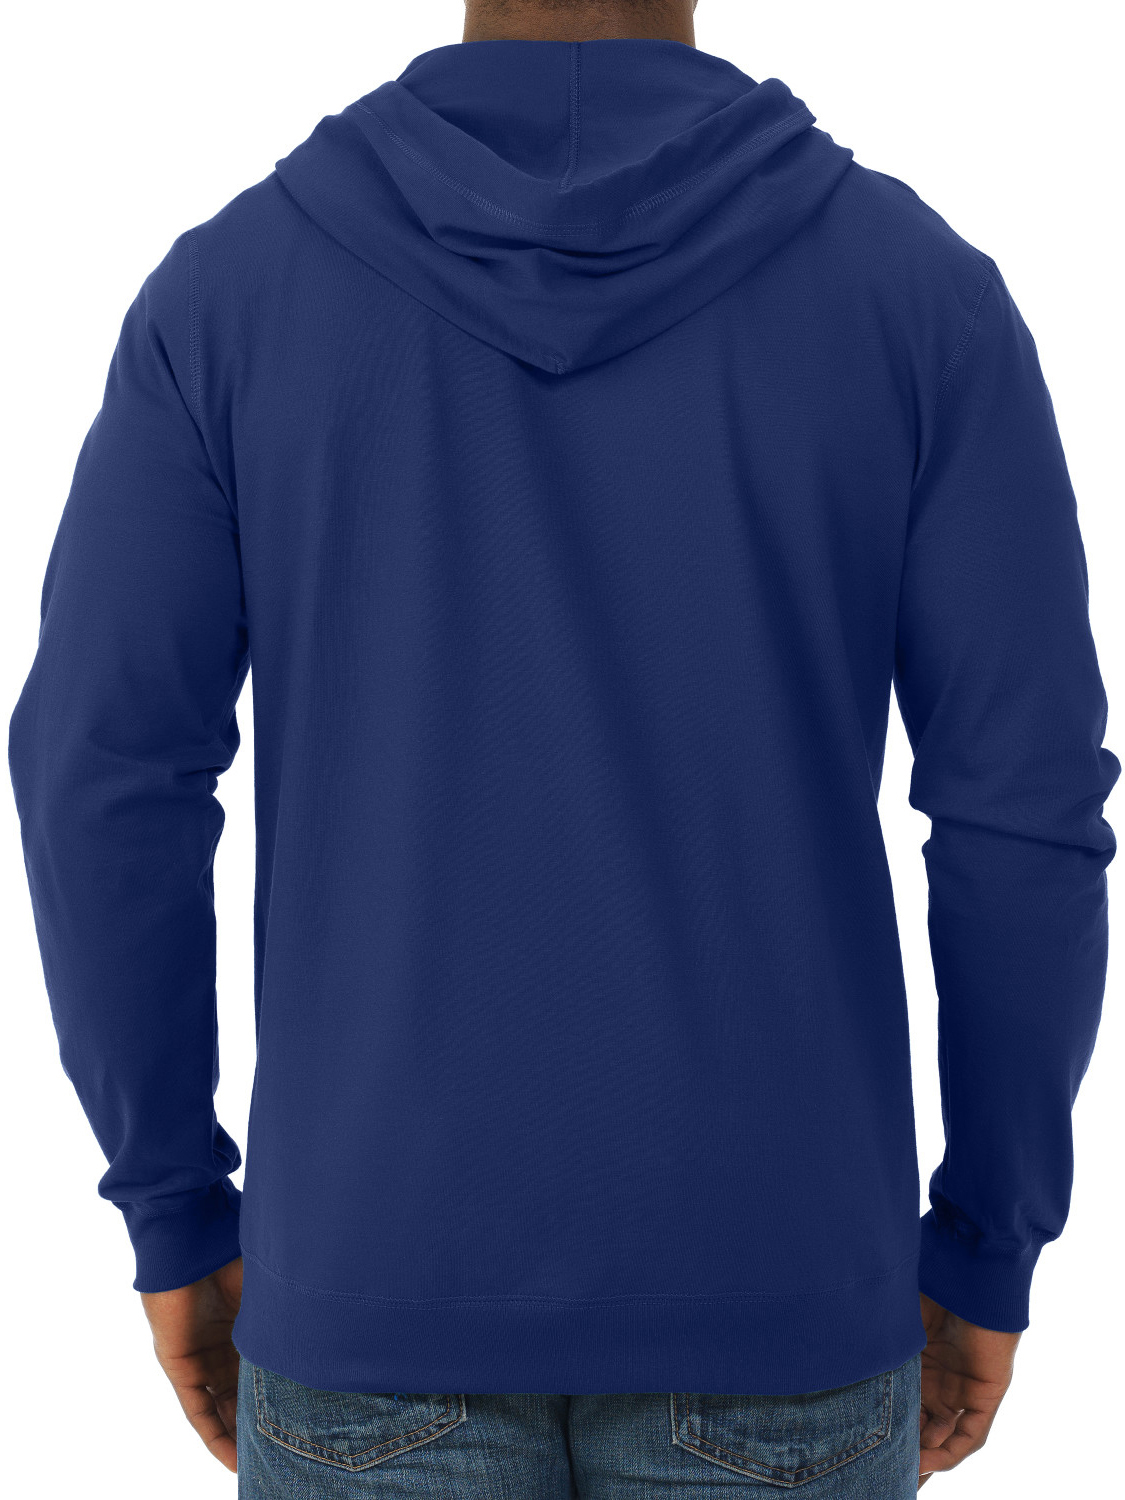 Fruit of the loom Men's and Big Men's Soft Jersey Full Zip Hooded Jacket - image 3 of 6